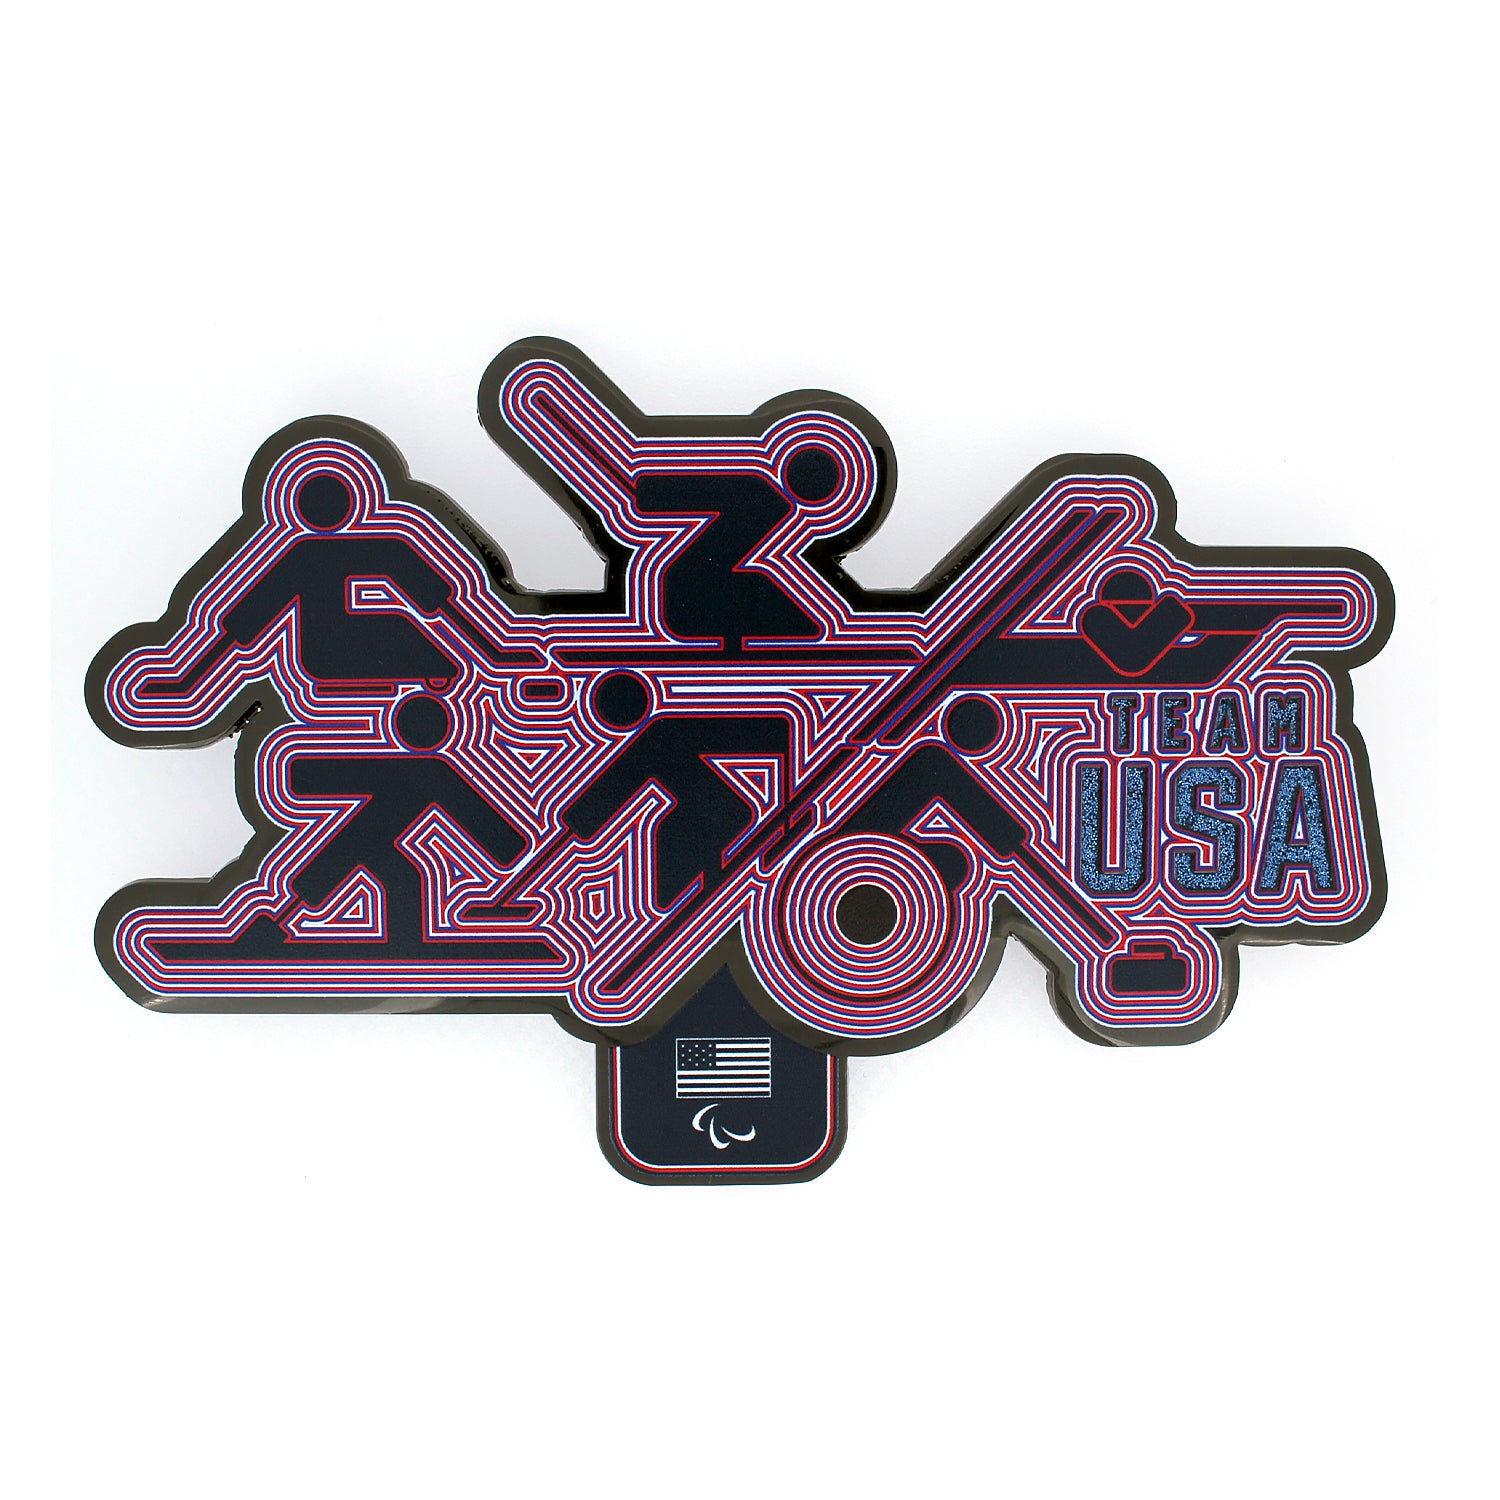 Oversized Team USA Paralympic Radiant Pictogram Collage Pin